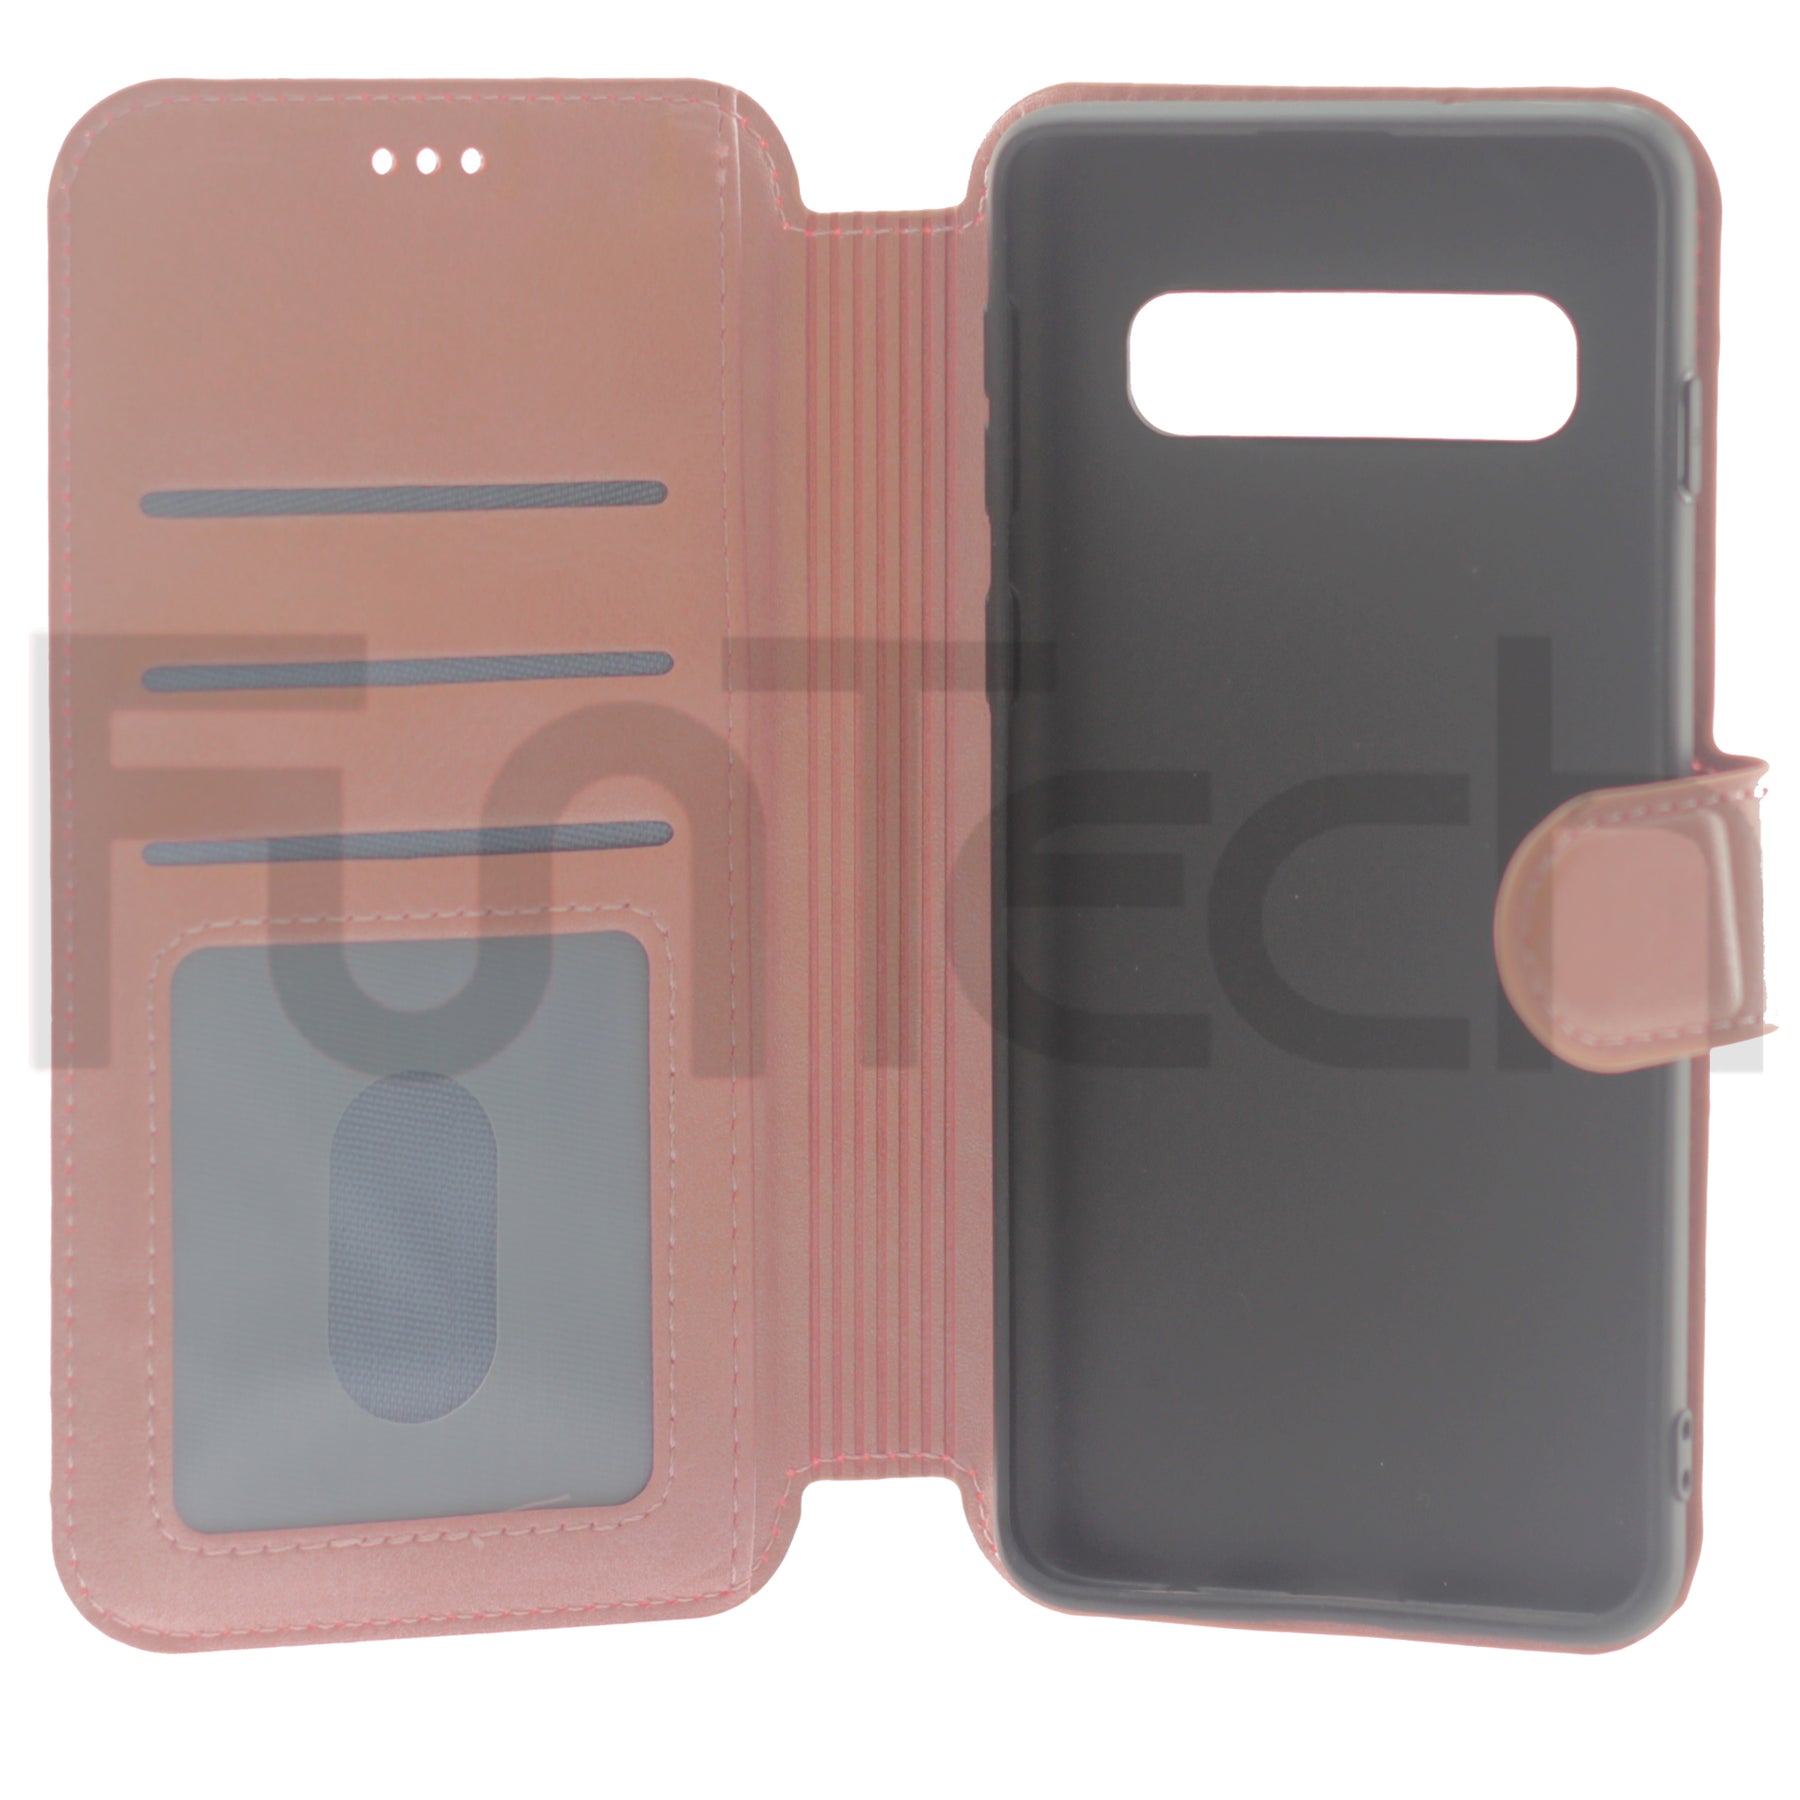 Samsung S10, Leather Case.